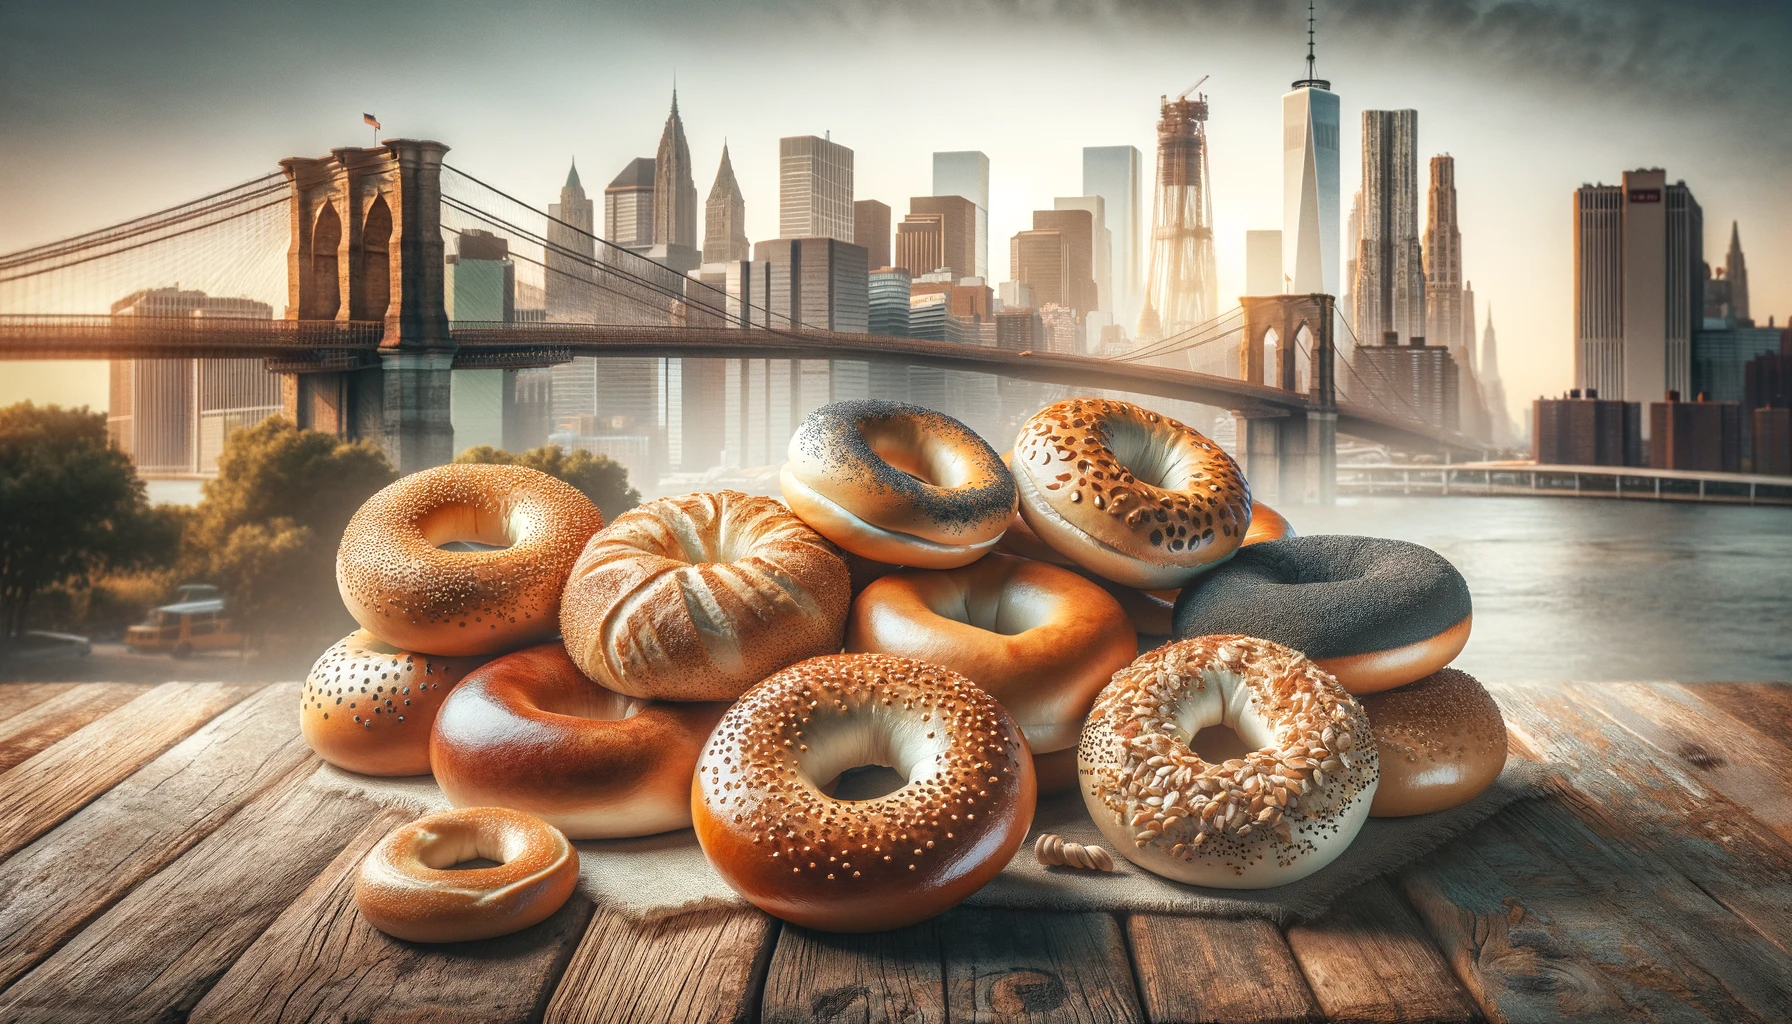 Assorted NY bagels on wooden table, highlighting NY water and bagels concept with New York Watermaker influence, NYC landmarks in background."